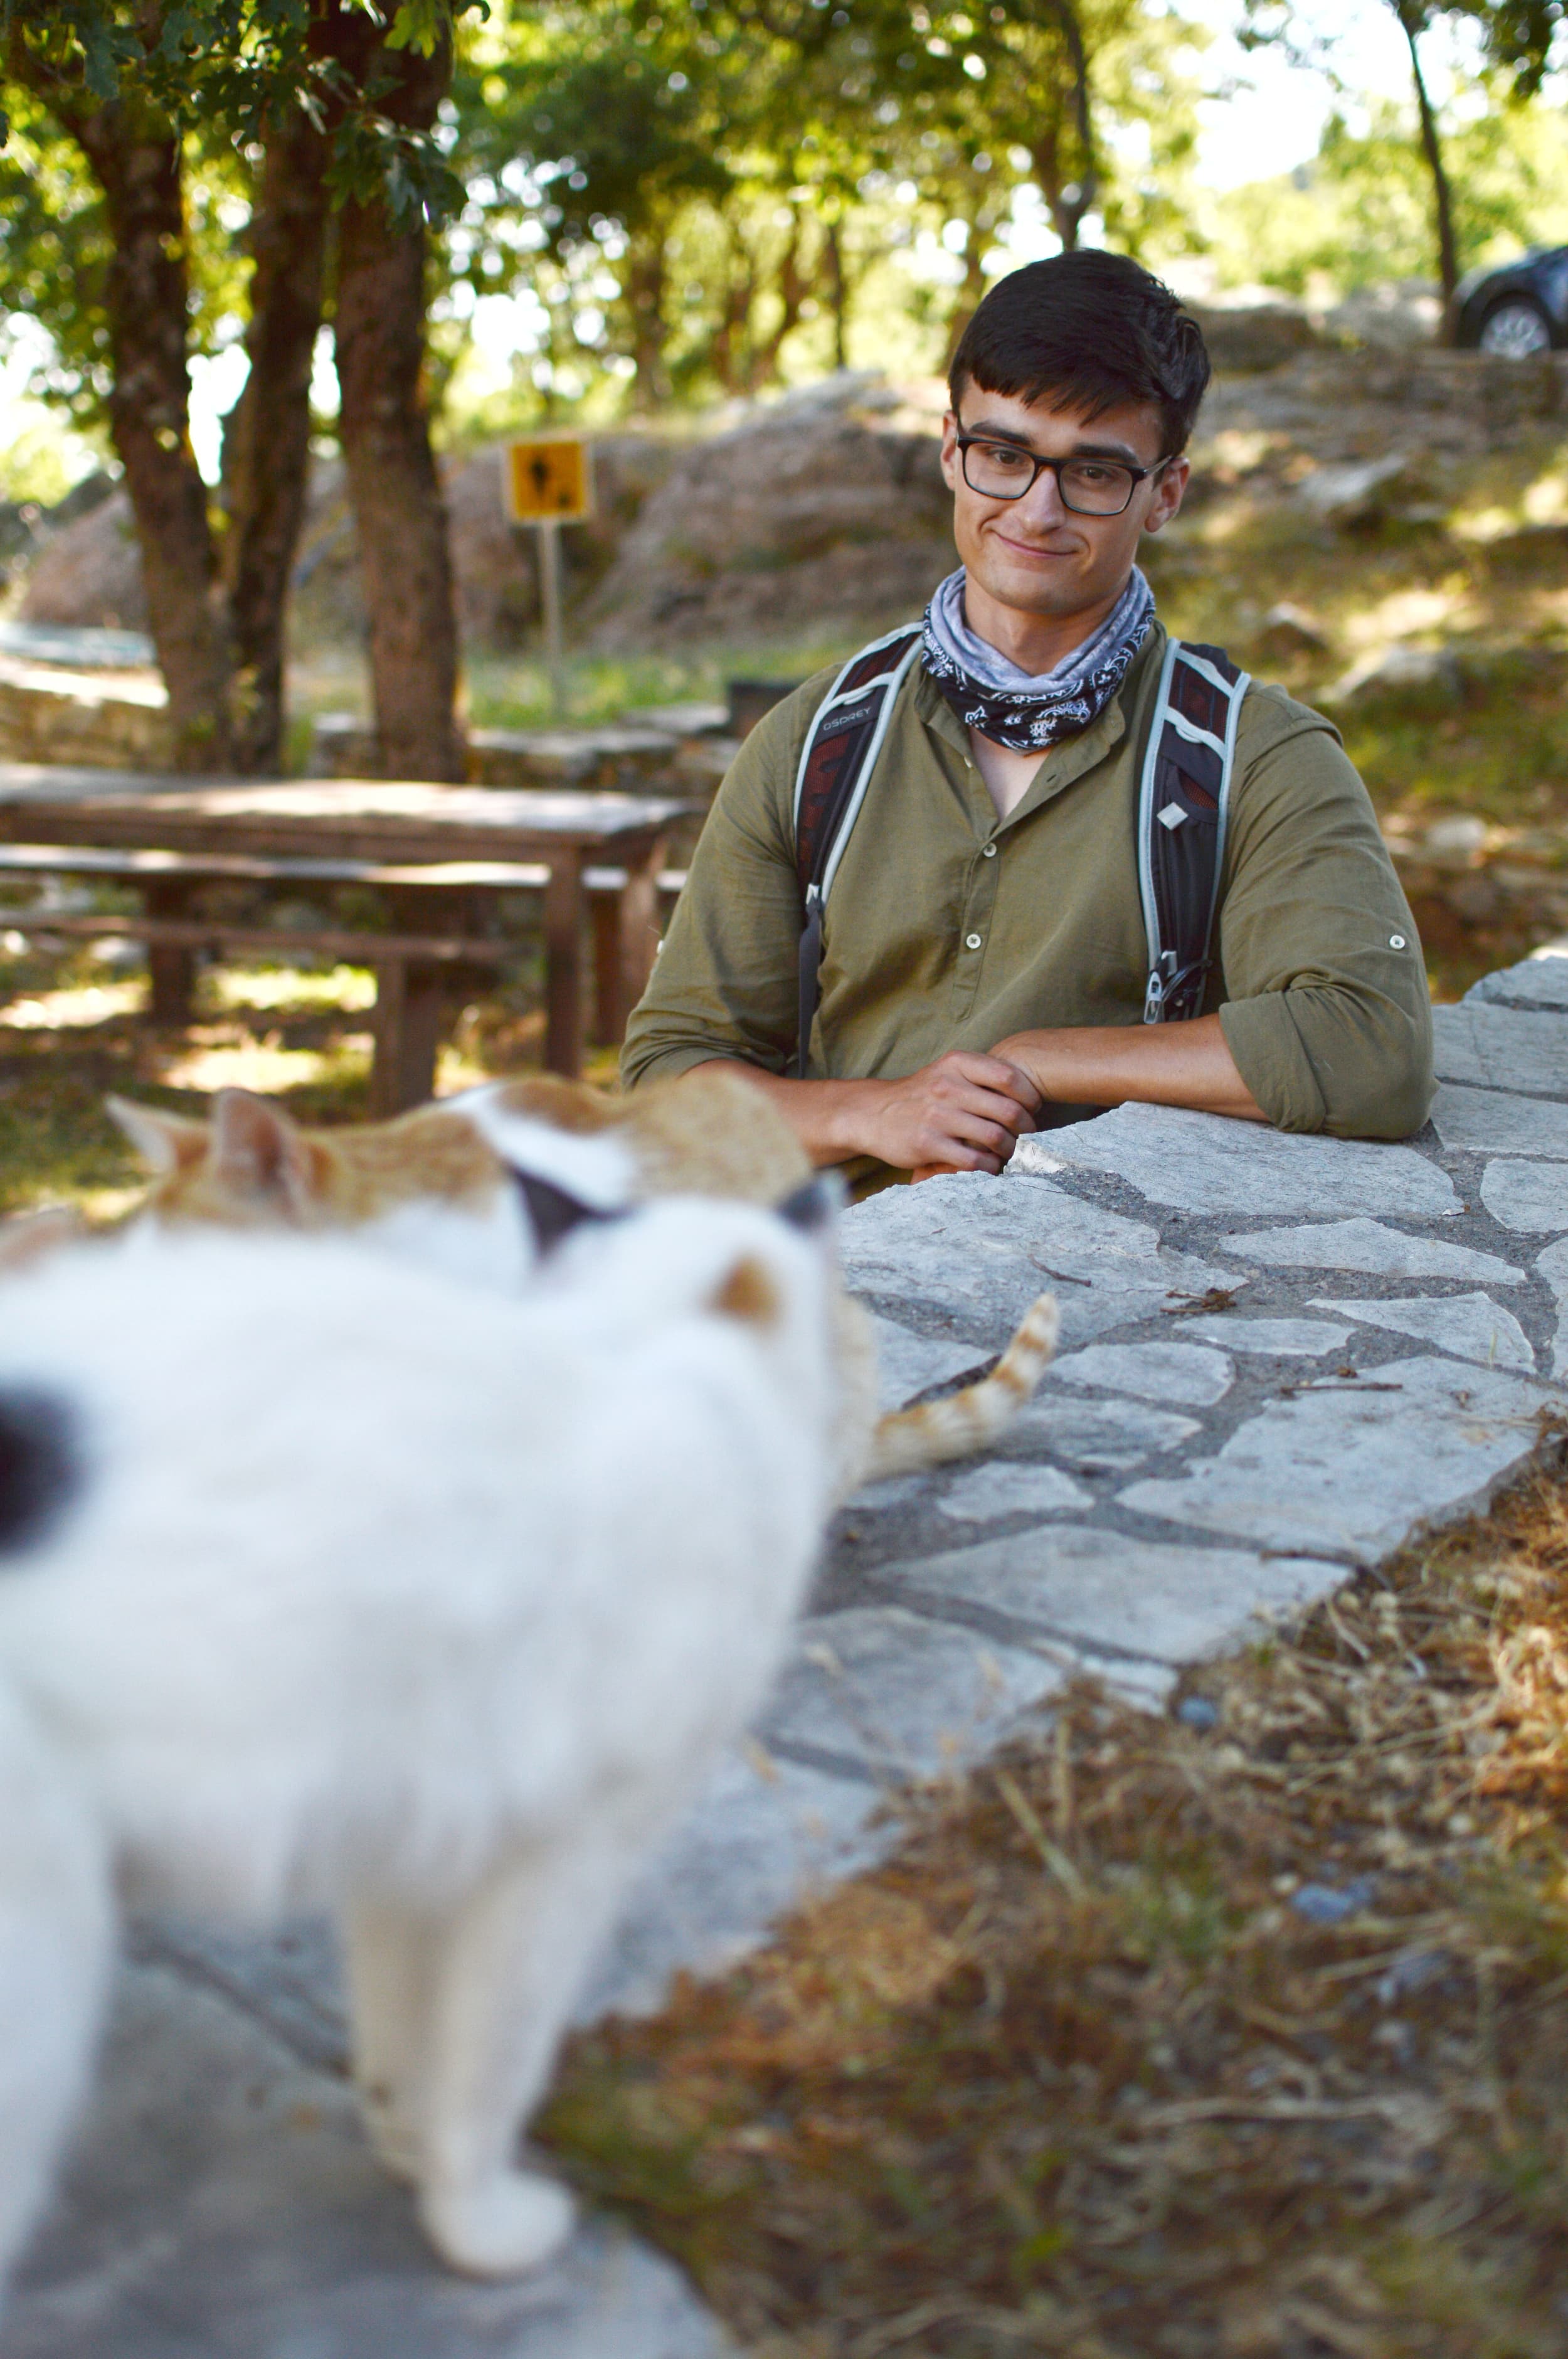 Evan Axel Andersson in outdoor picnic setting with two cats